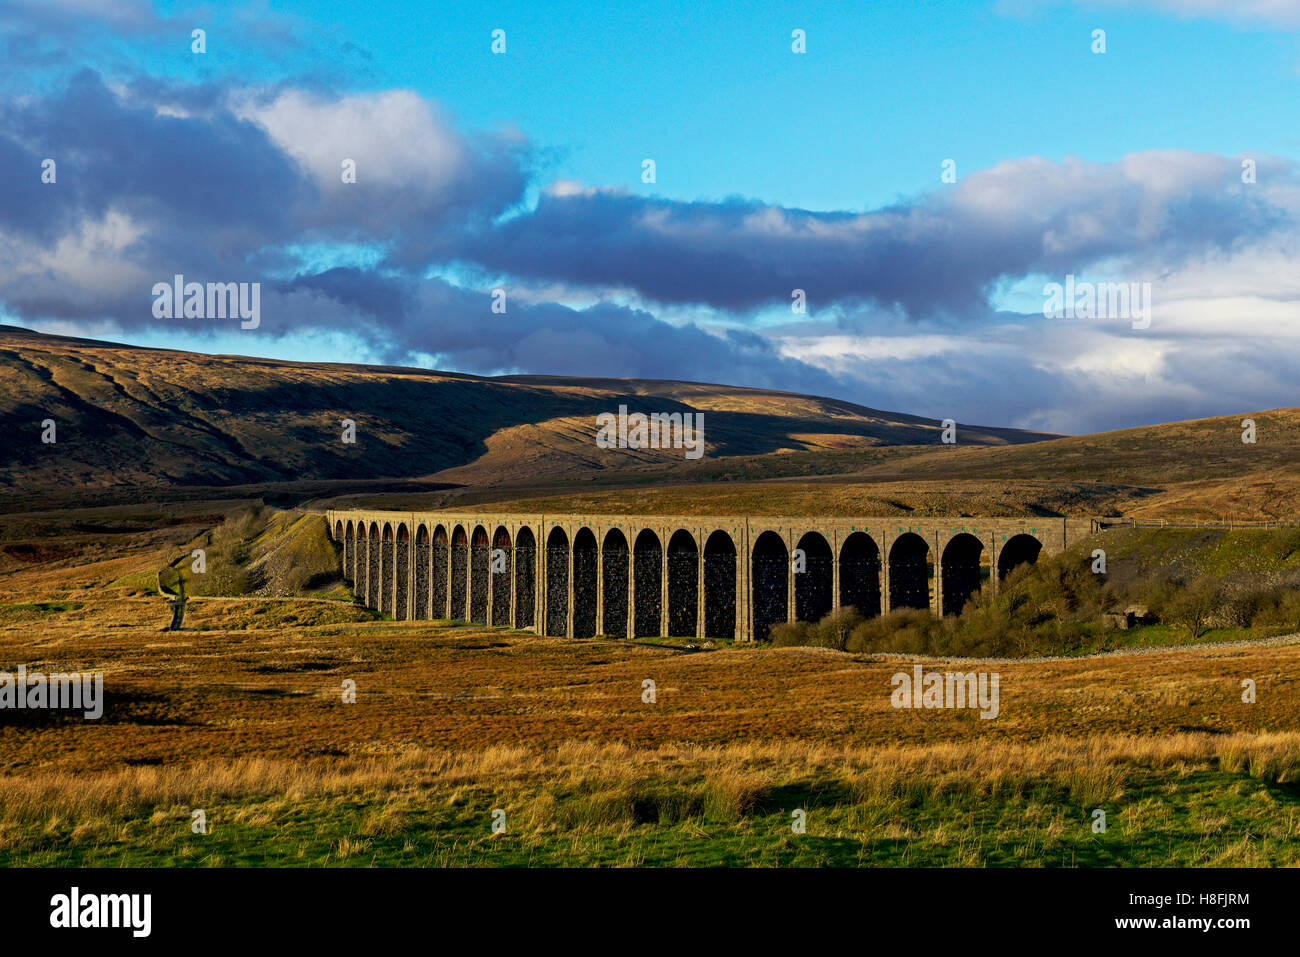 The Ribblehead Viaduct on the Settle & Carlisle Railway Line, Yorkshire Dales National Park, North Yorkshire, England UK Stock Photo